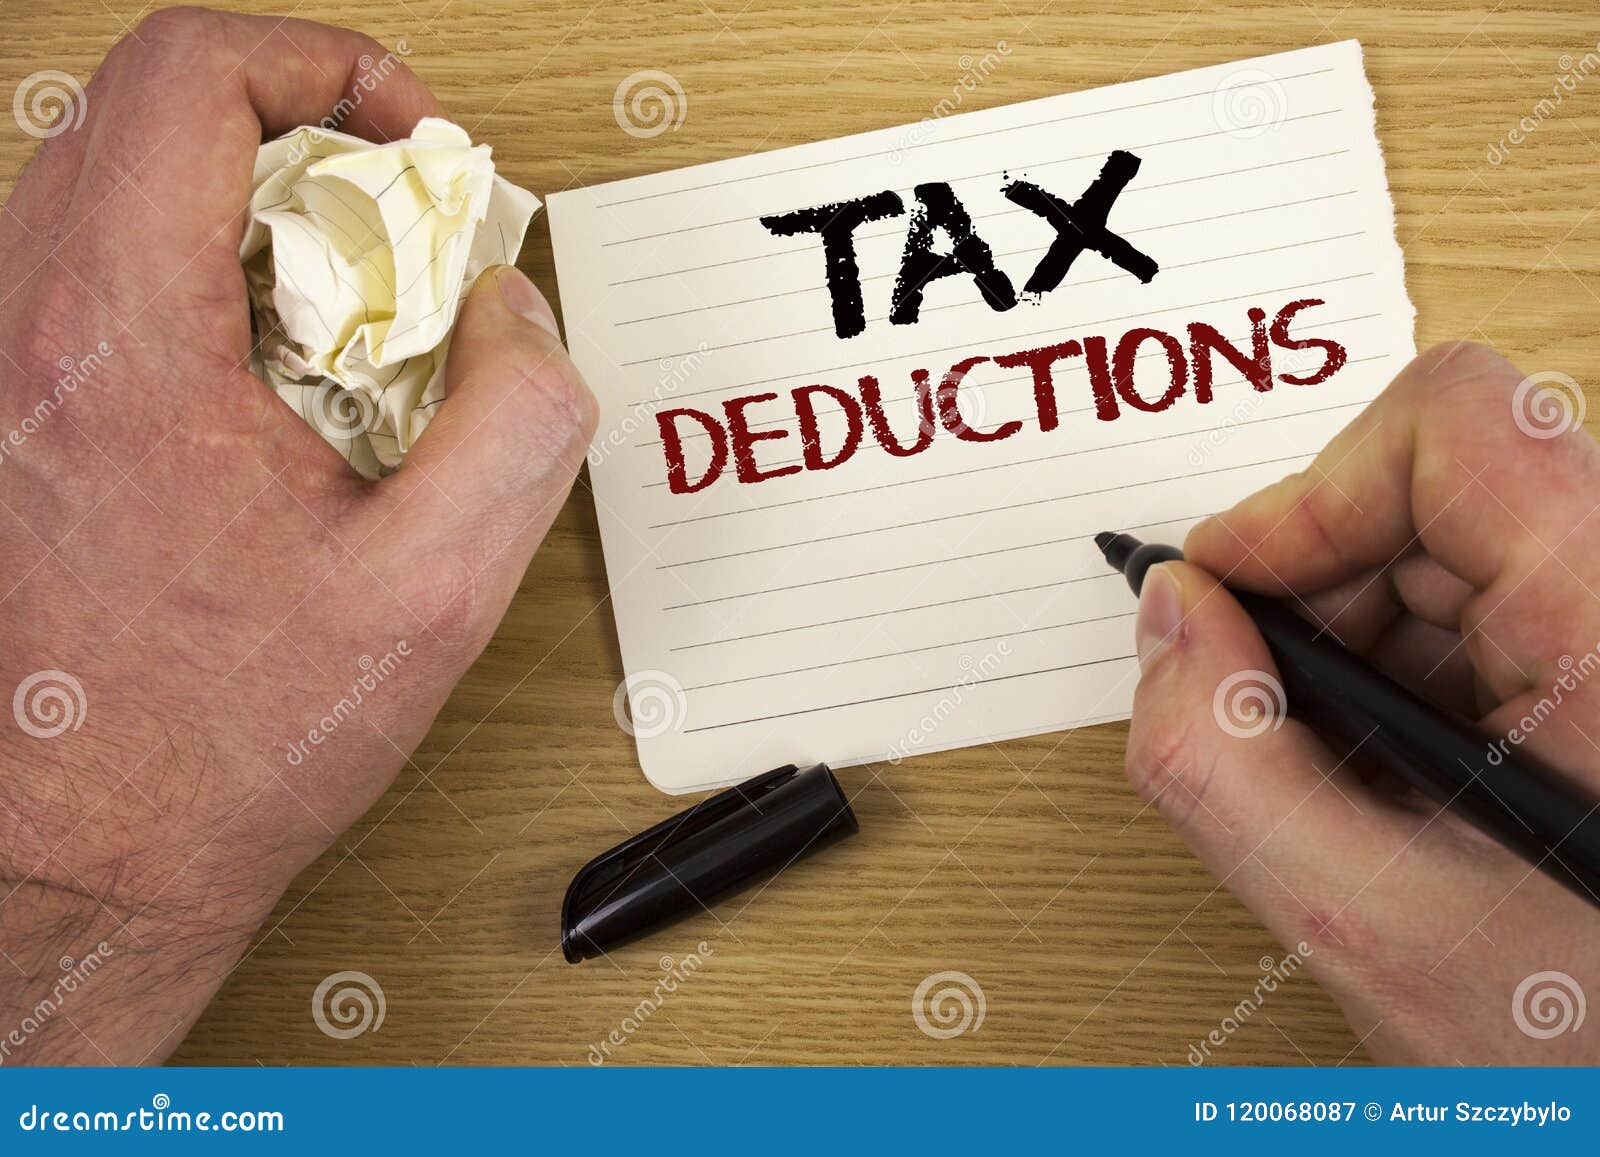 handwriting-text-tax-deductions-concept-meaning-reduction-on-taxes